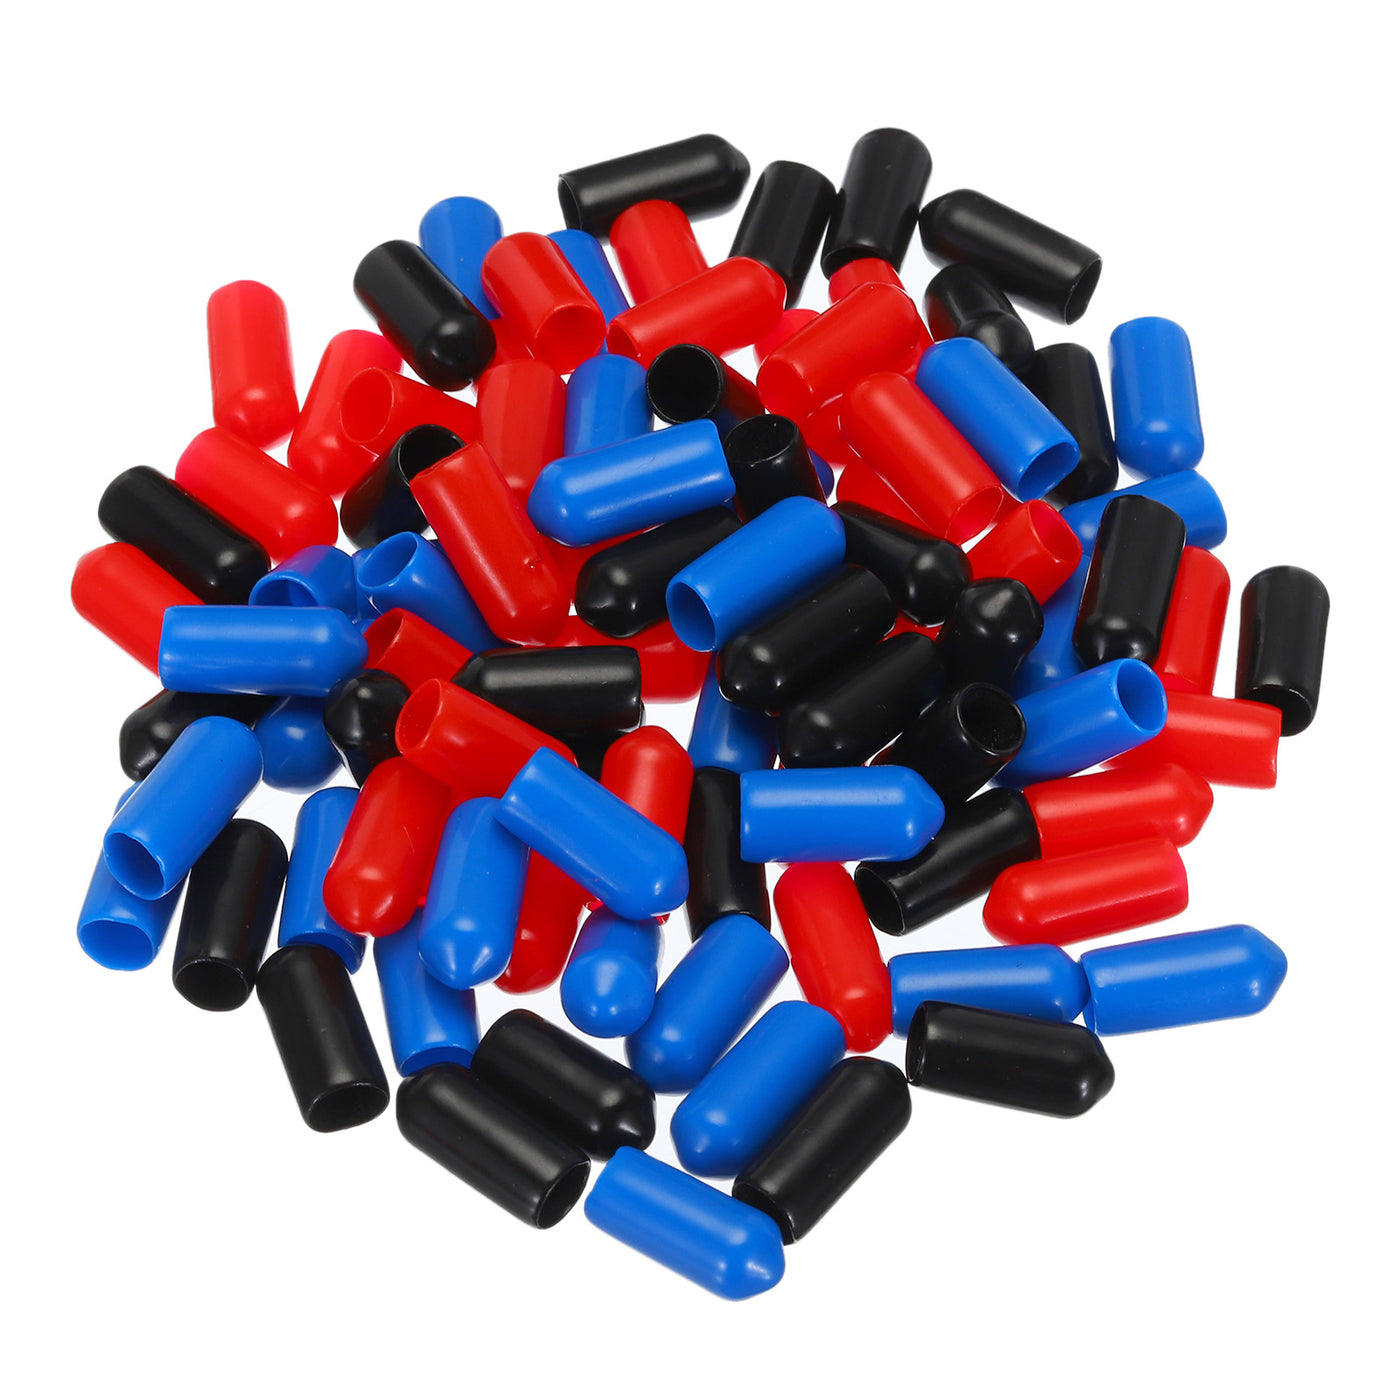 uxcell Uxcell 180pcs Rubber End Caps 6.5mm(1/4") ID Vinyl PVC Round Tube Bolt Cap Cover Screw Thread Protectors, Black Red Blue